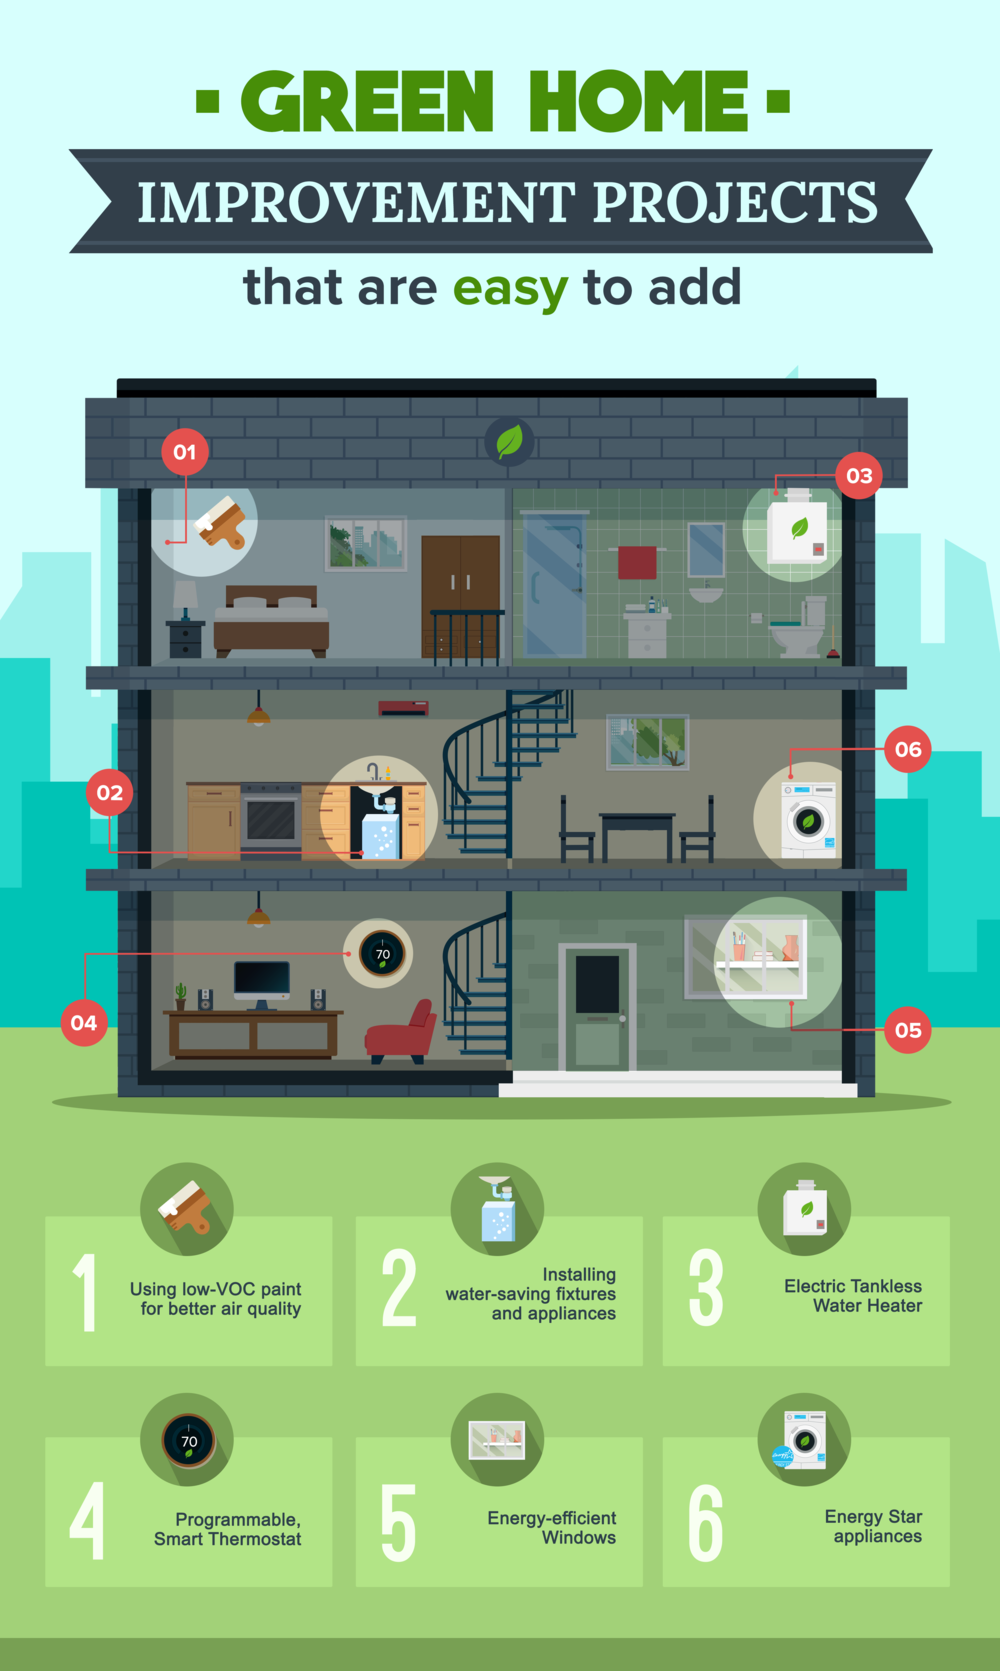 4 surefire ways to make your home more
energy efficient